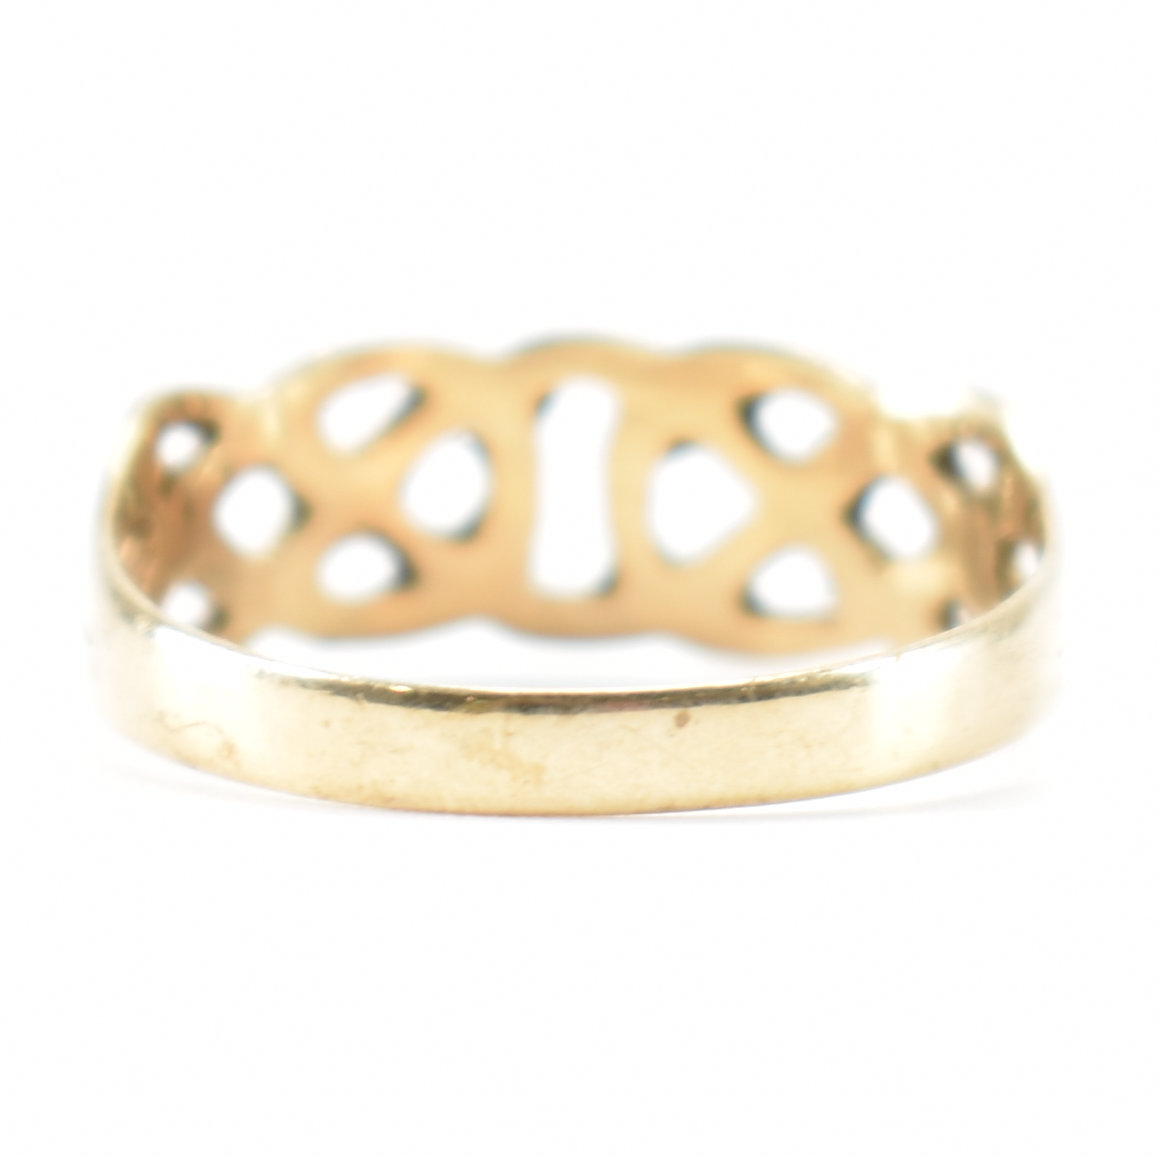 HALLMARKED 9CT GOLD CELTIC KNOT RING - Image 4 of 8